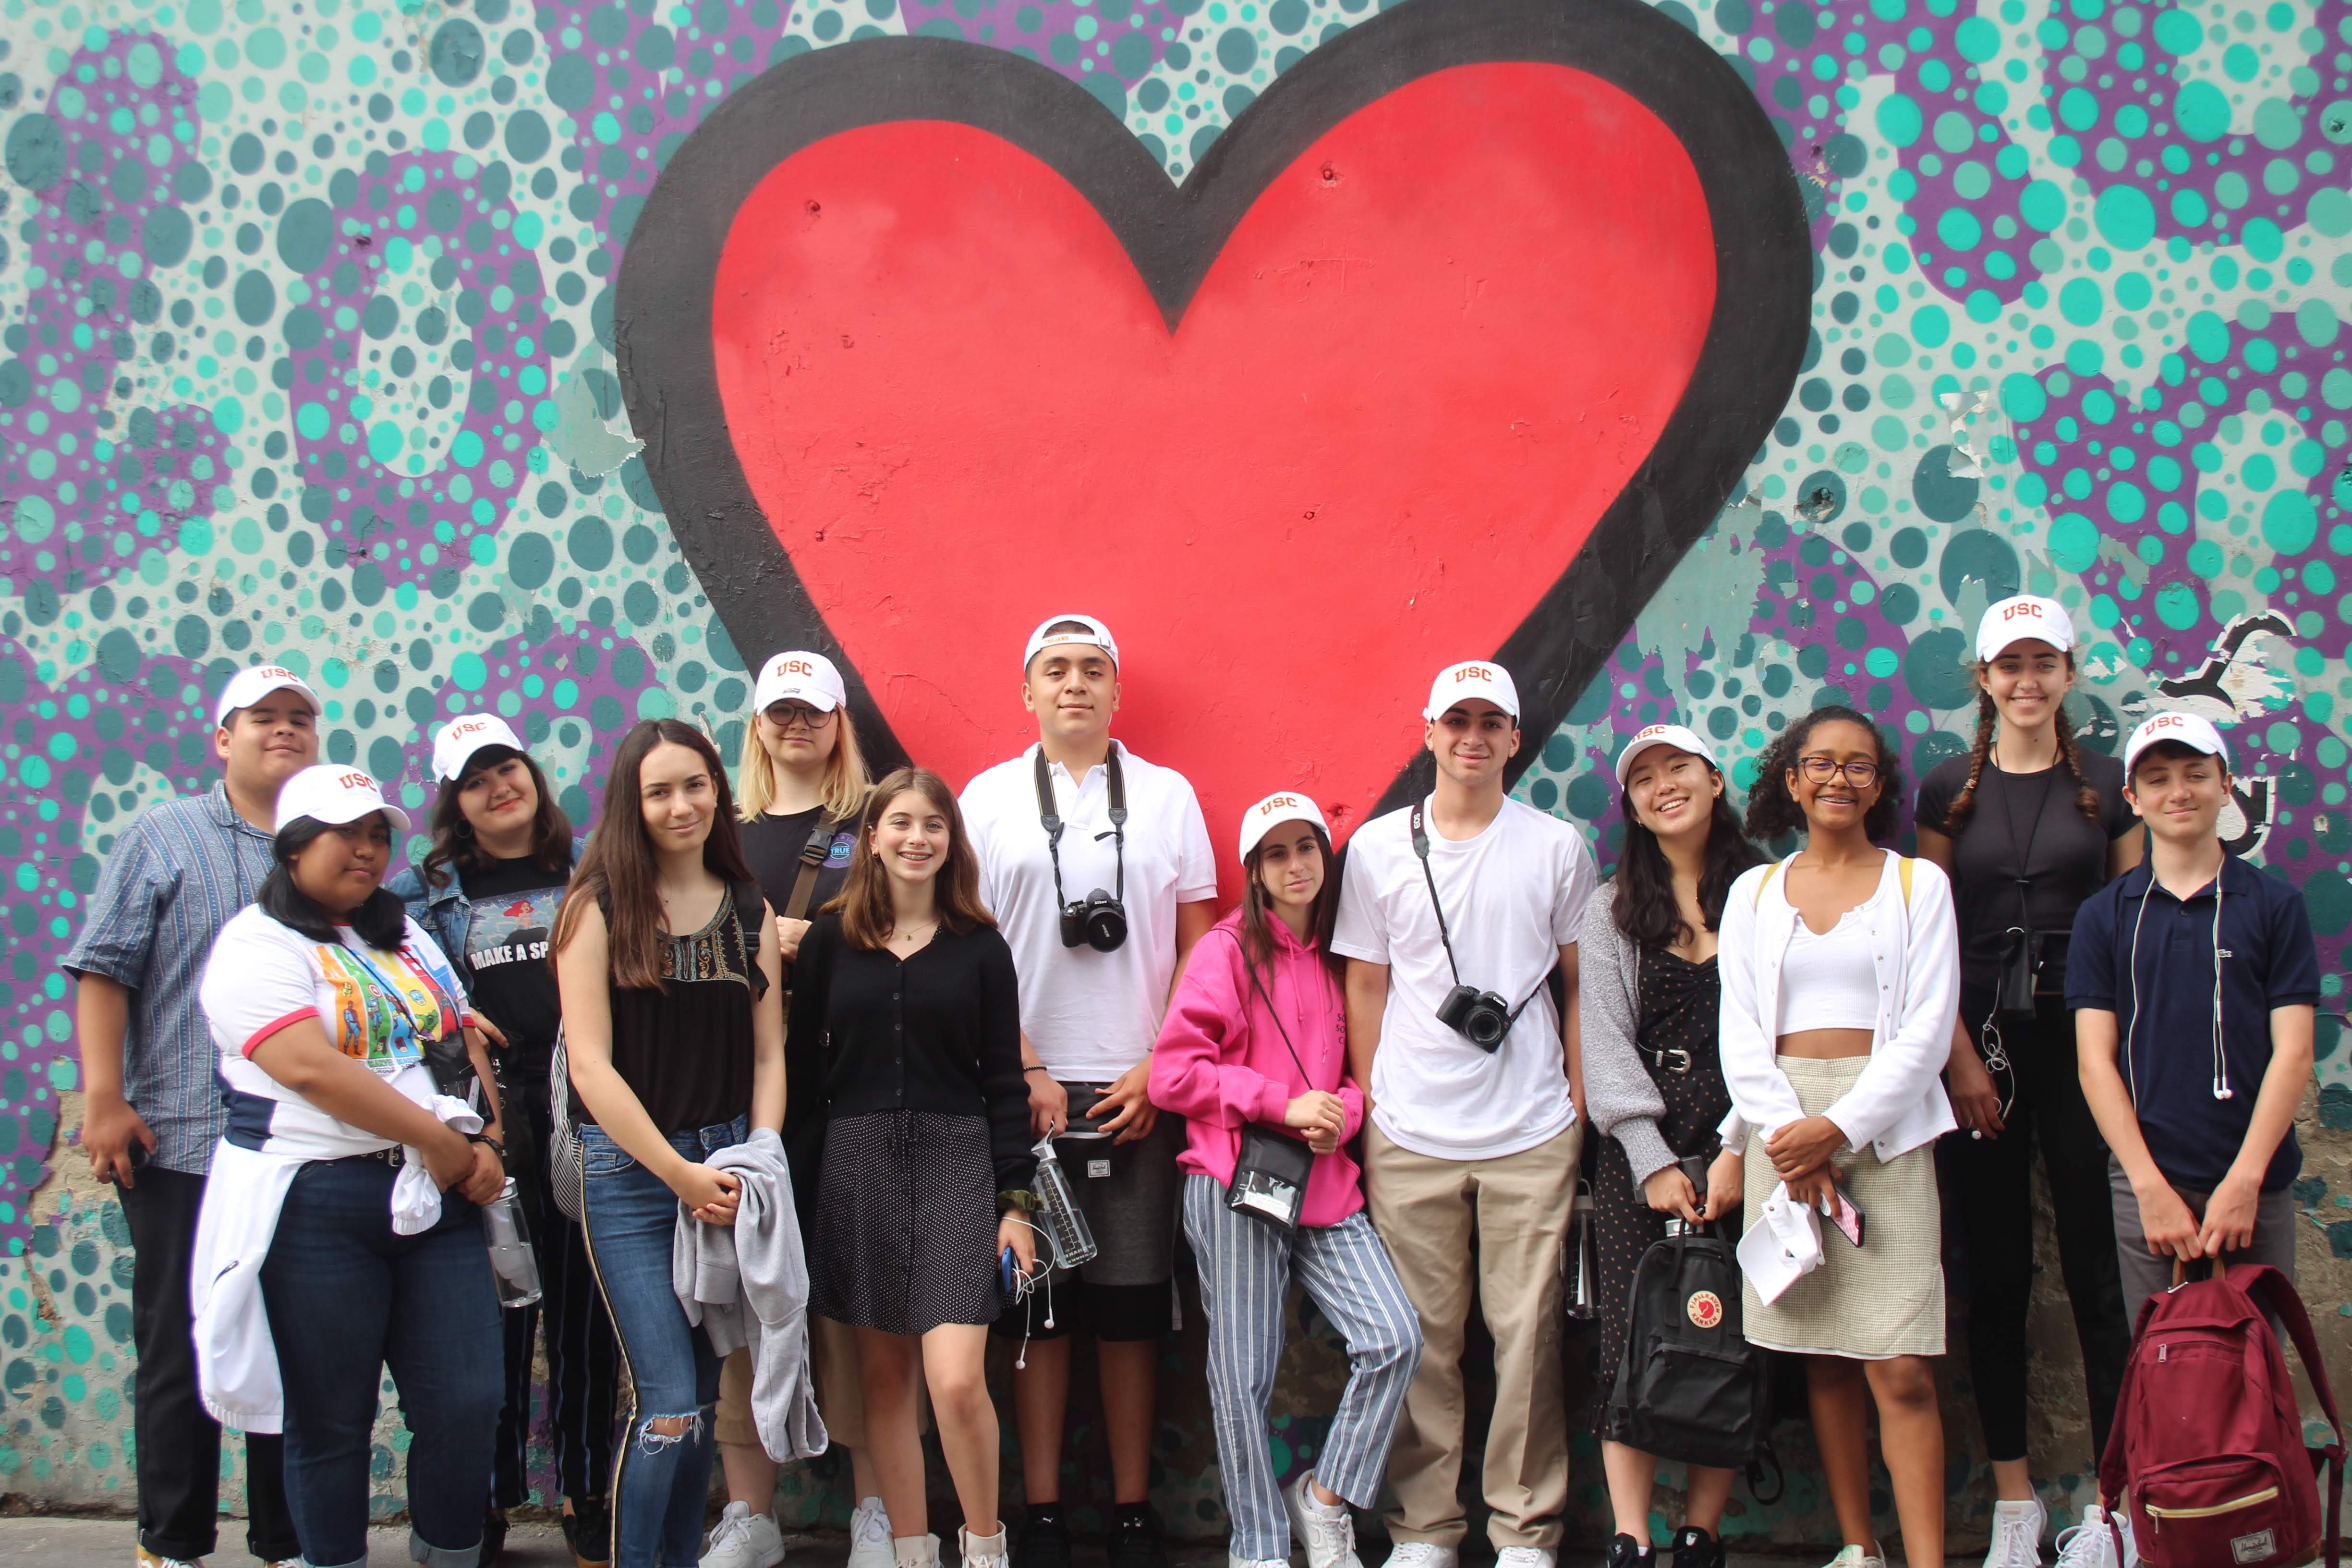 &lt;span style=&quot;font-family: Calibri, sans-serif; font-size: 14.6667px;&quot;&gt;The William P. Lauder Junior Interns in Budapest in 2019, in front of a mural in the Jewish quarter that reads “Love Thy Neighbor.”&lt;/span&gt;